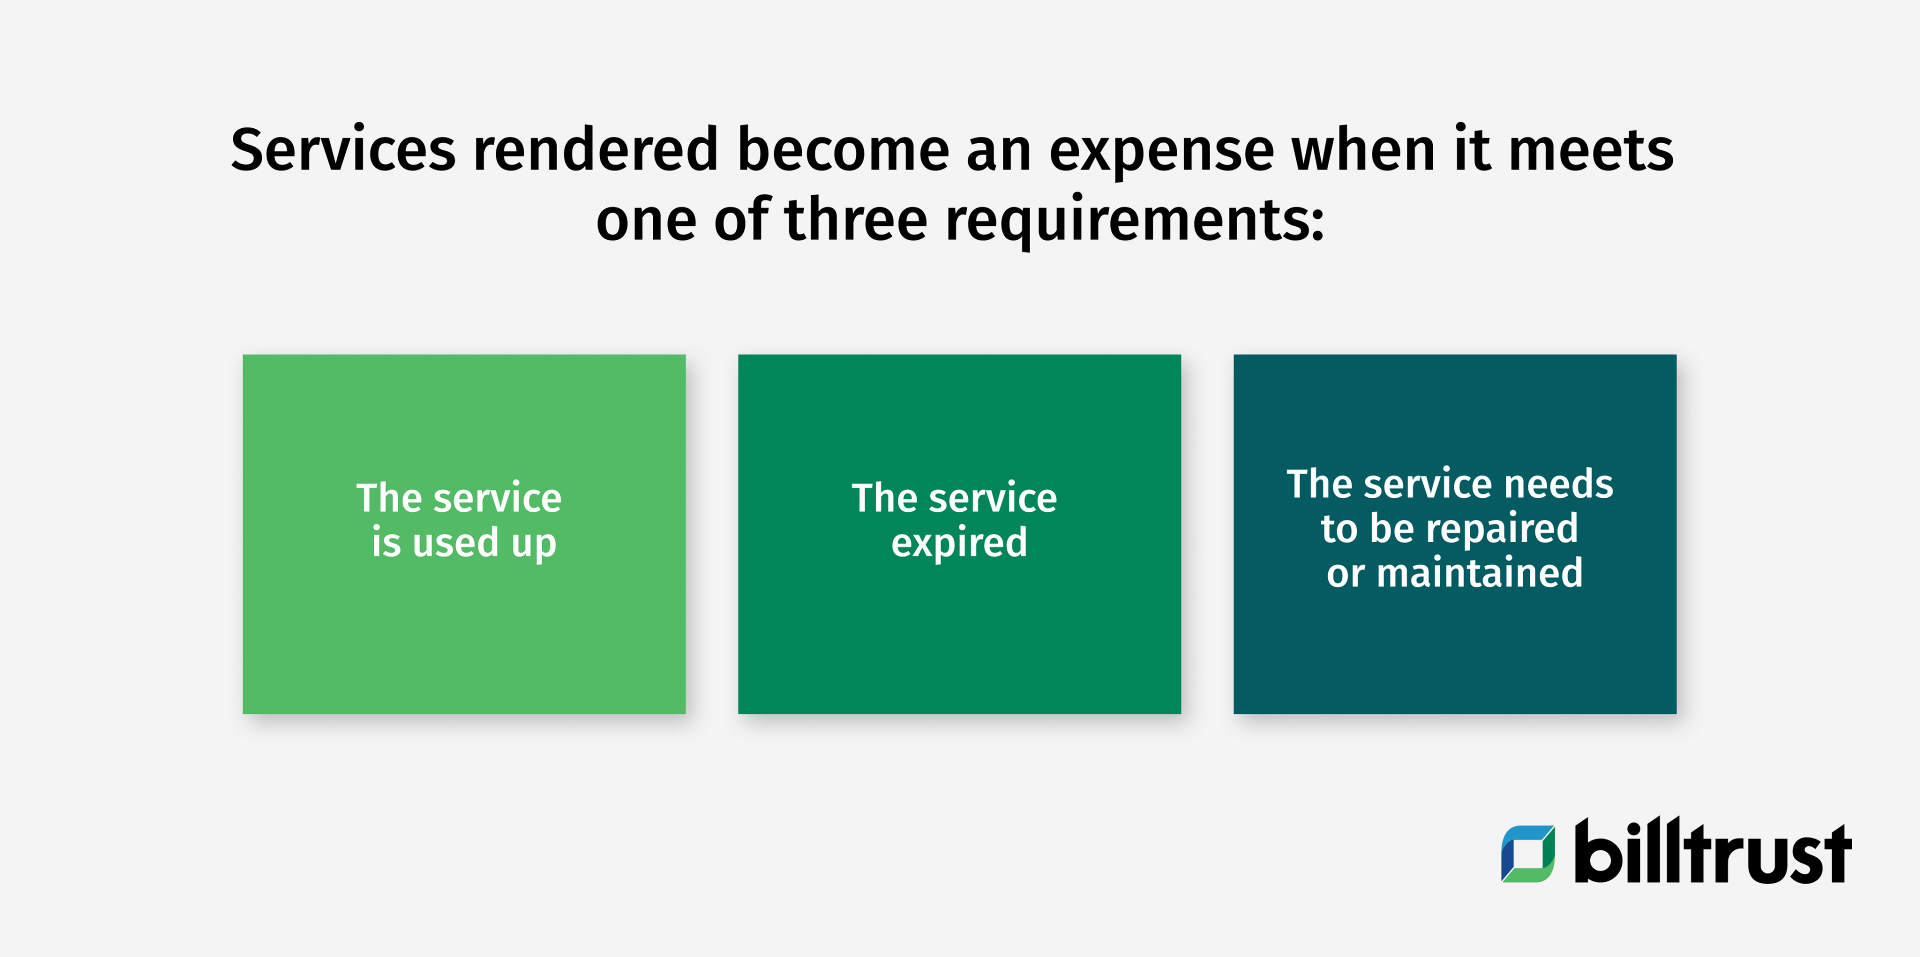 Diagram of the requirements that make services rendered become an expense